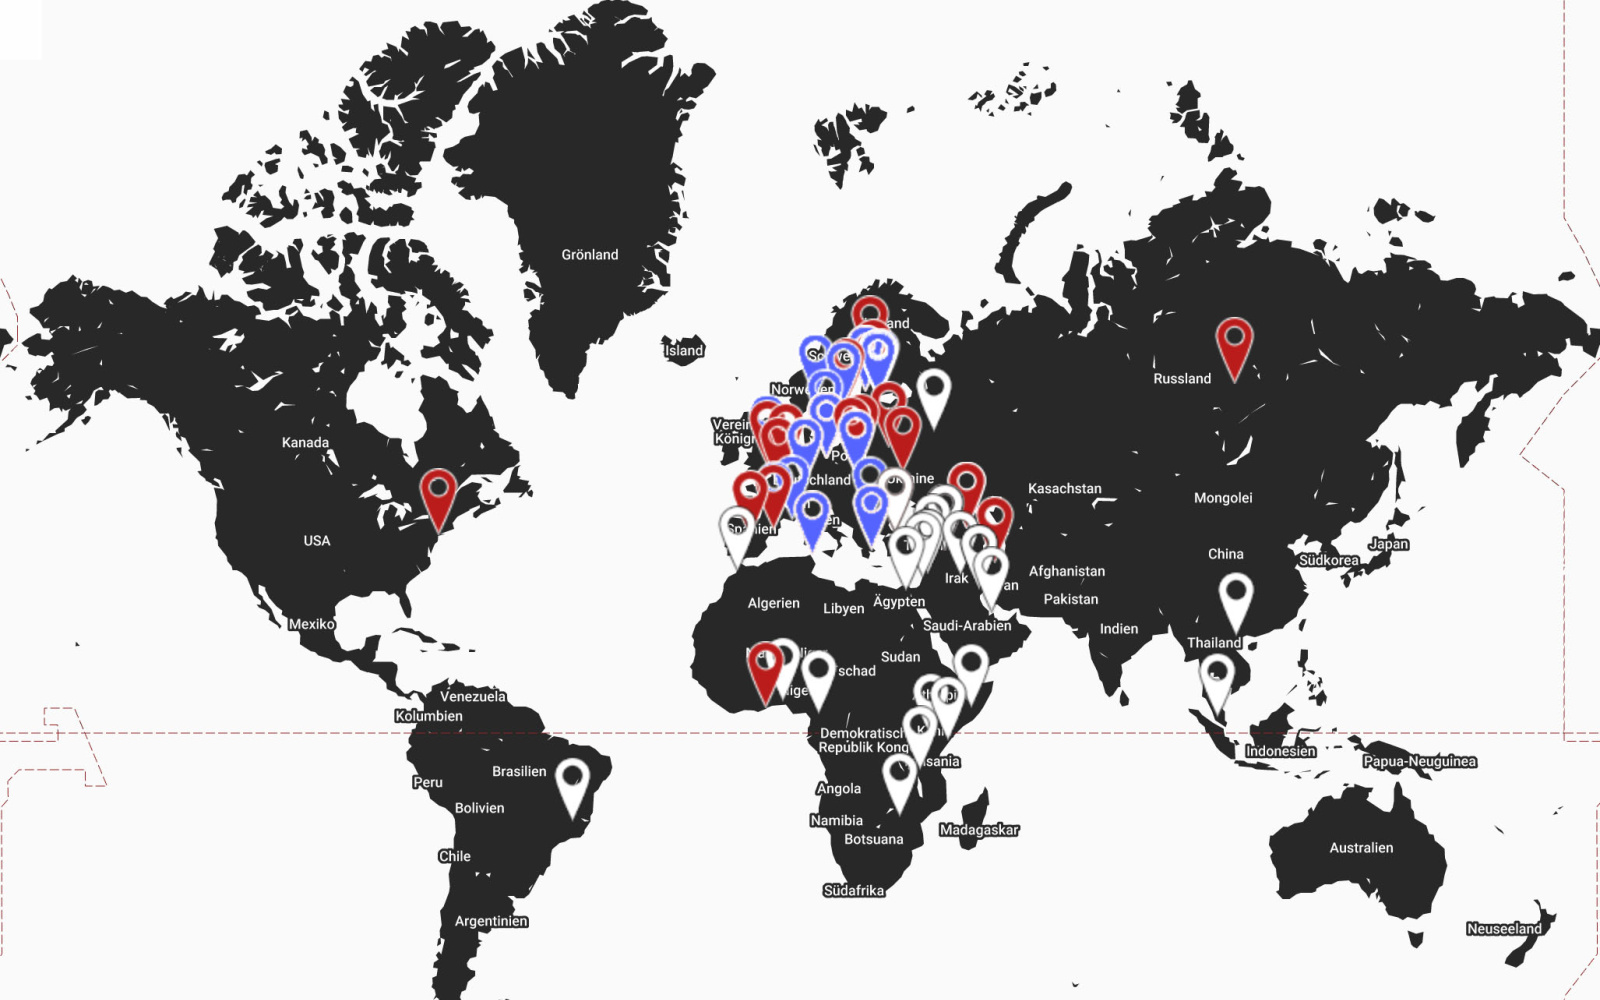 You can see a black and white world map with markers of AR residencies, artists and events